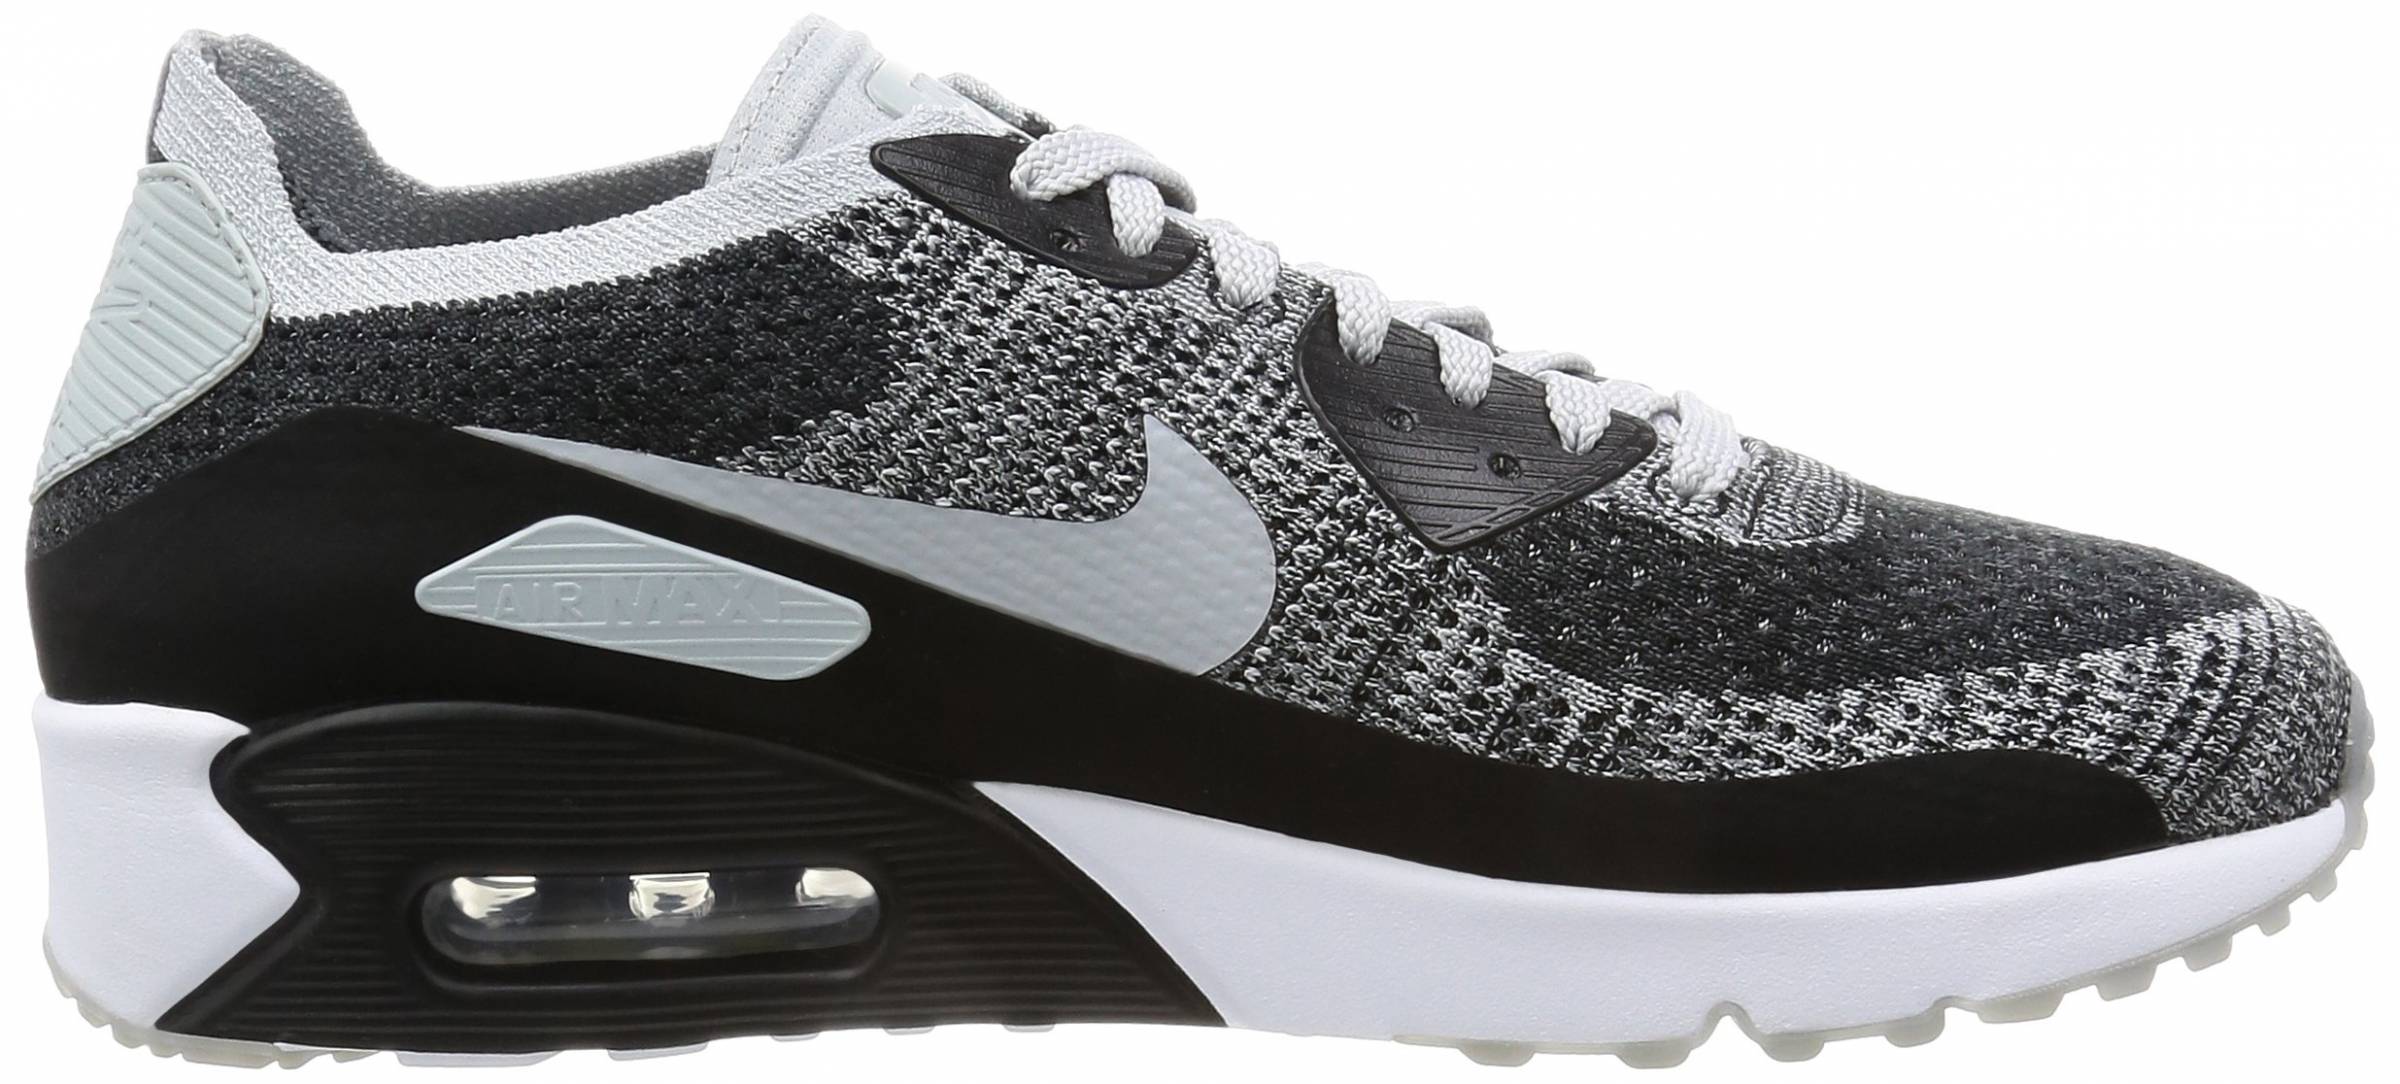 11 Reasons to/NOT to Buy Nike Air Max 90 Ultra 2.0 Flyknit (Aug ...